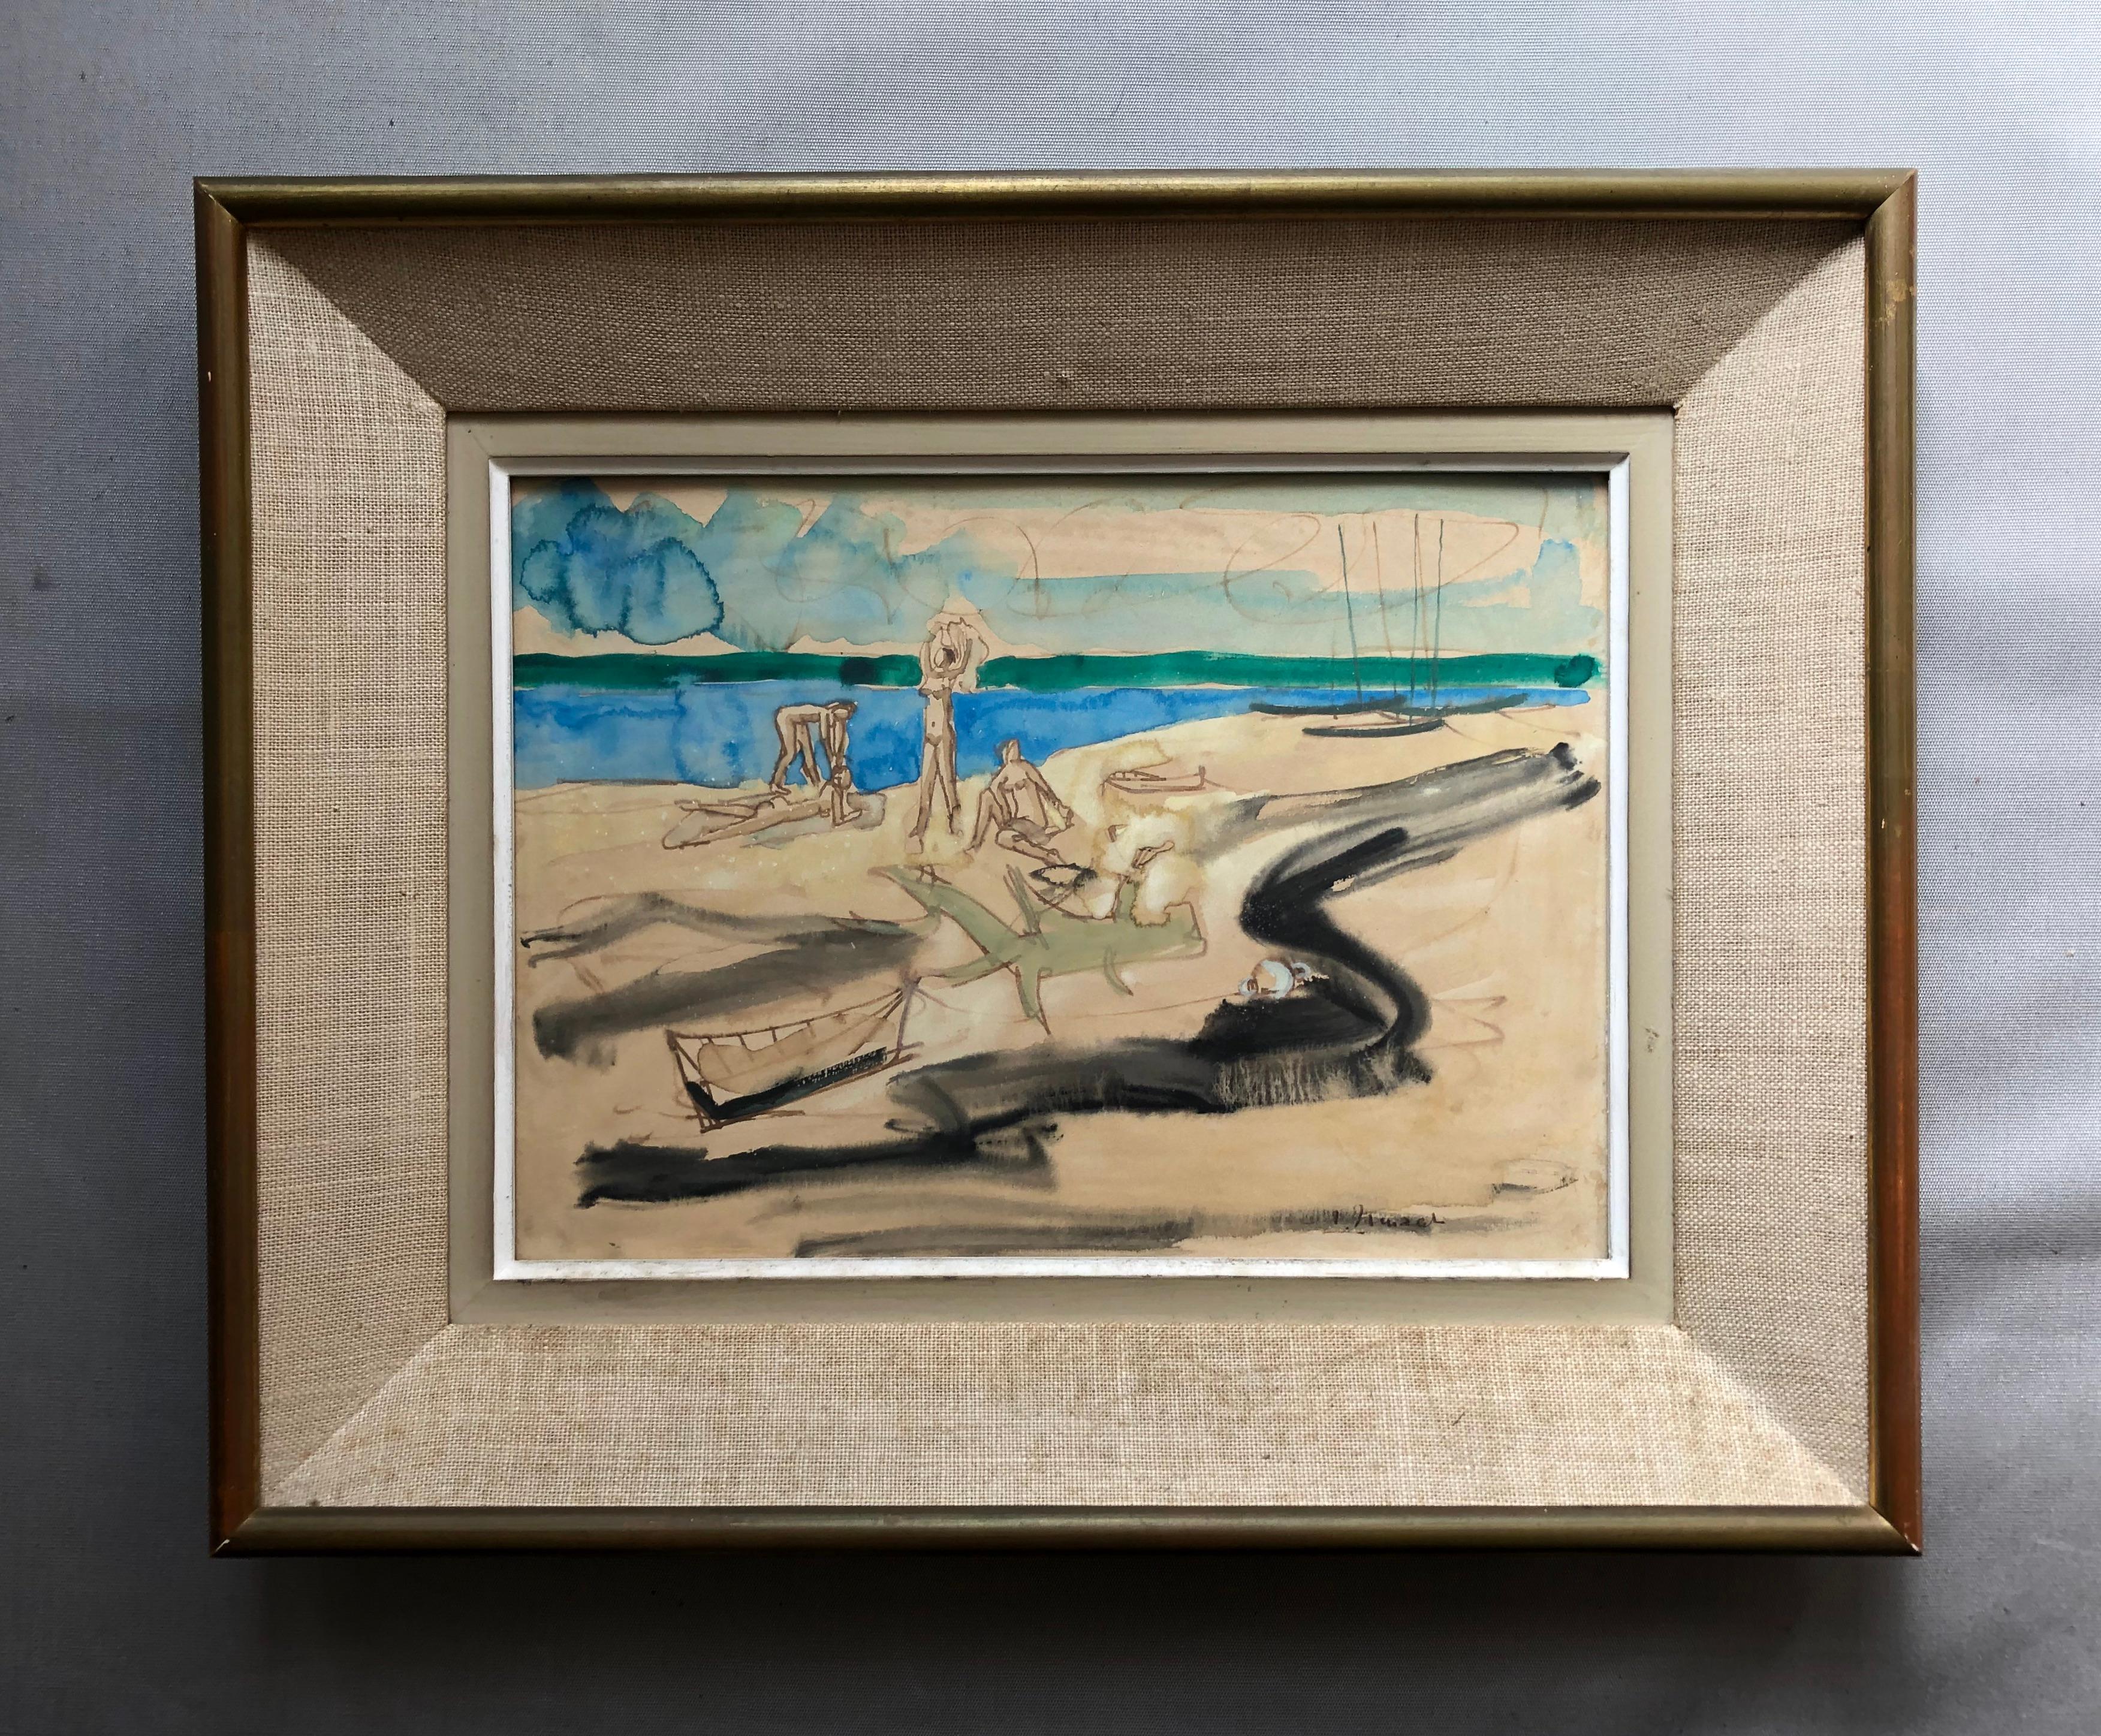 Unknown Landscape Art - At The Beach, Watercolor, Signature To Identify